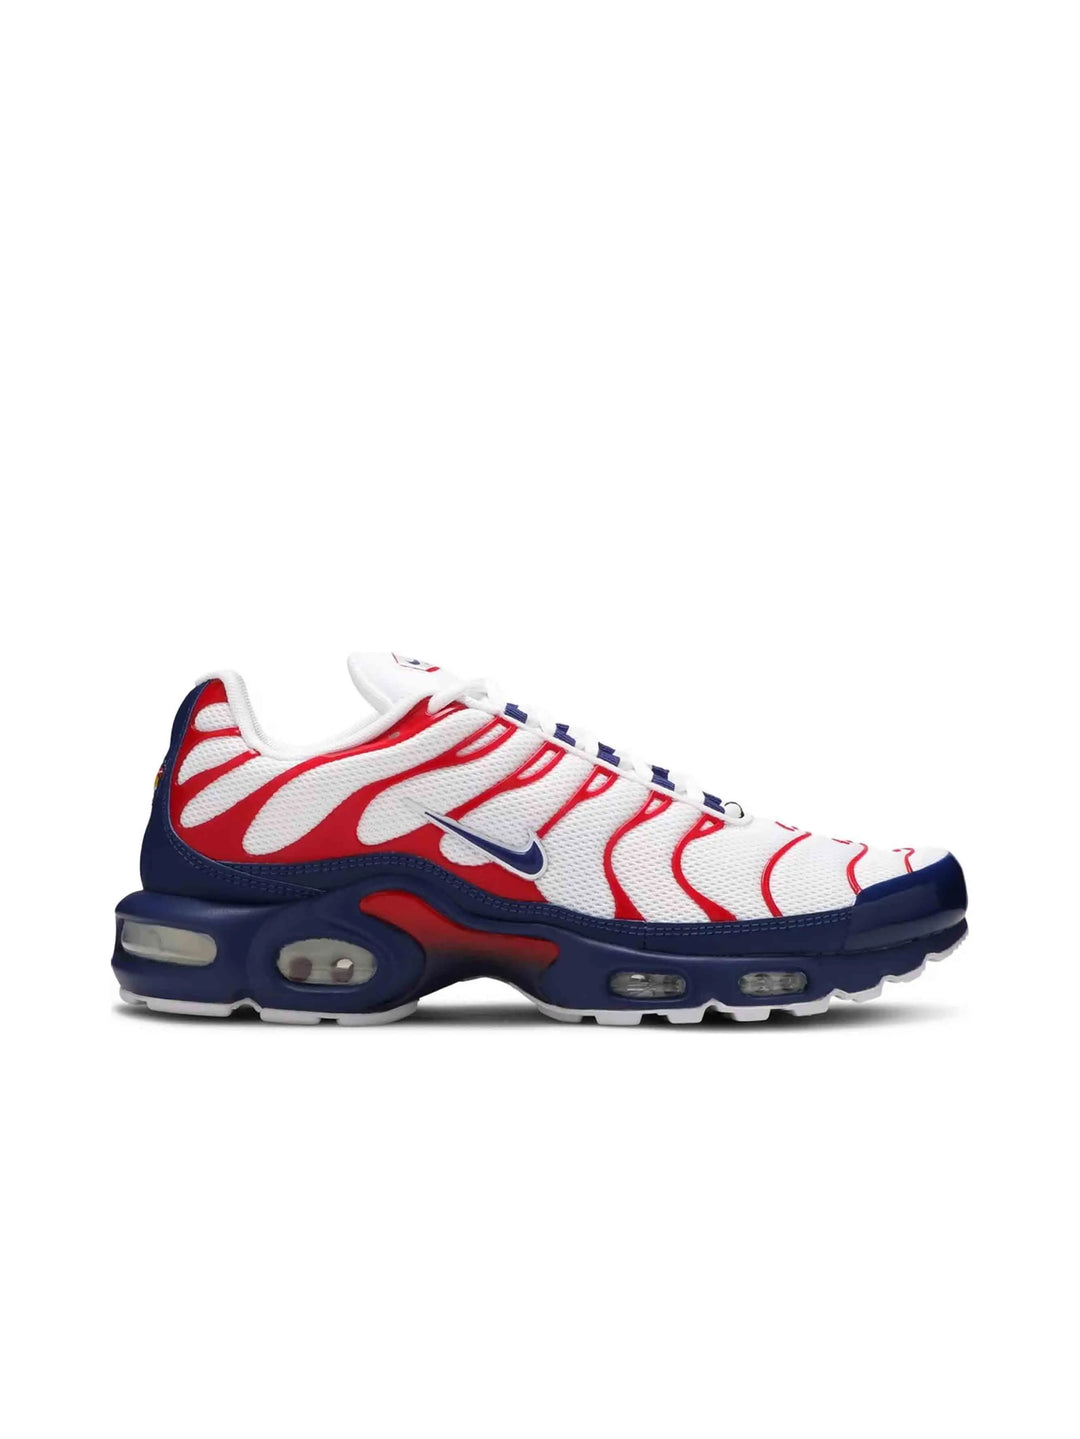 Nike Air Max Plus USA White Red in Auckland, New Zealand - Shop name